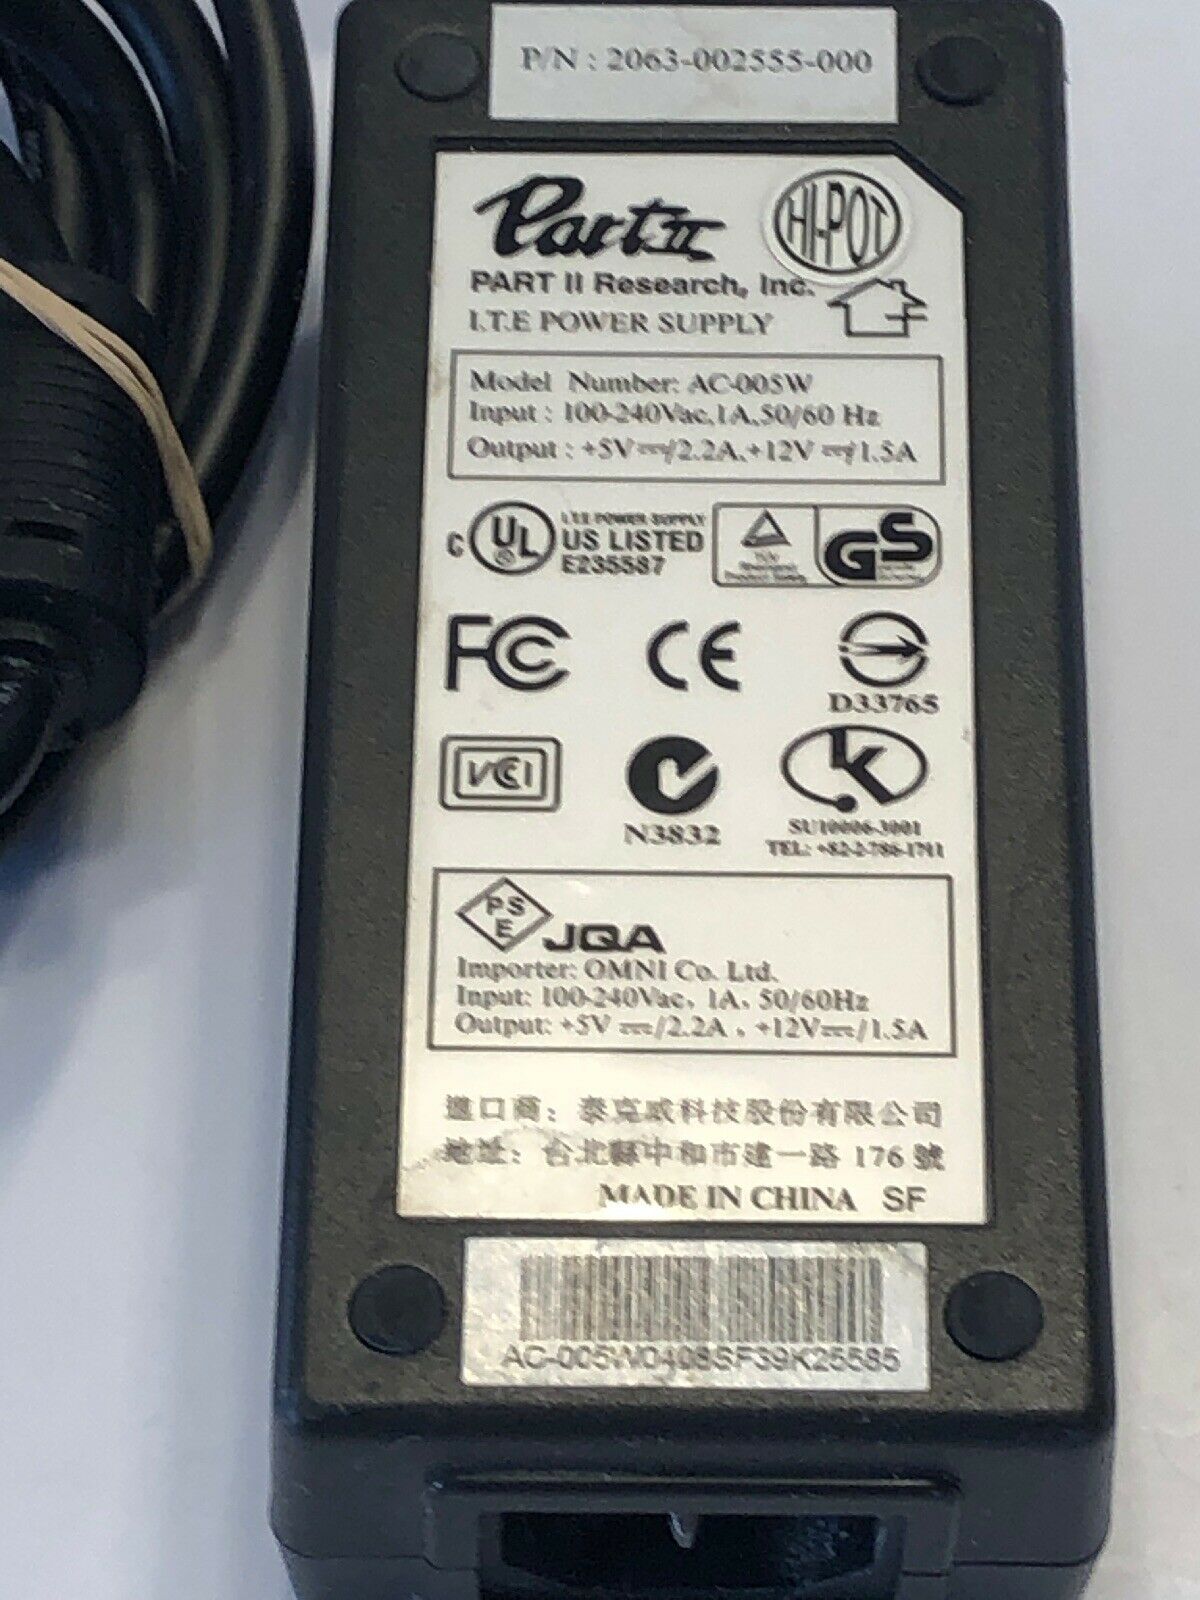 NEW 5V 2.2A 12V 1.5A PART II Research AC-005W 2063-002555-001 4-Pin AC Adapter